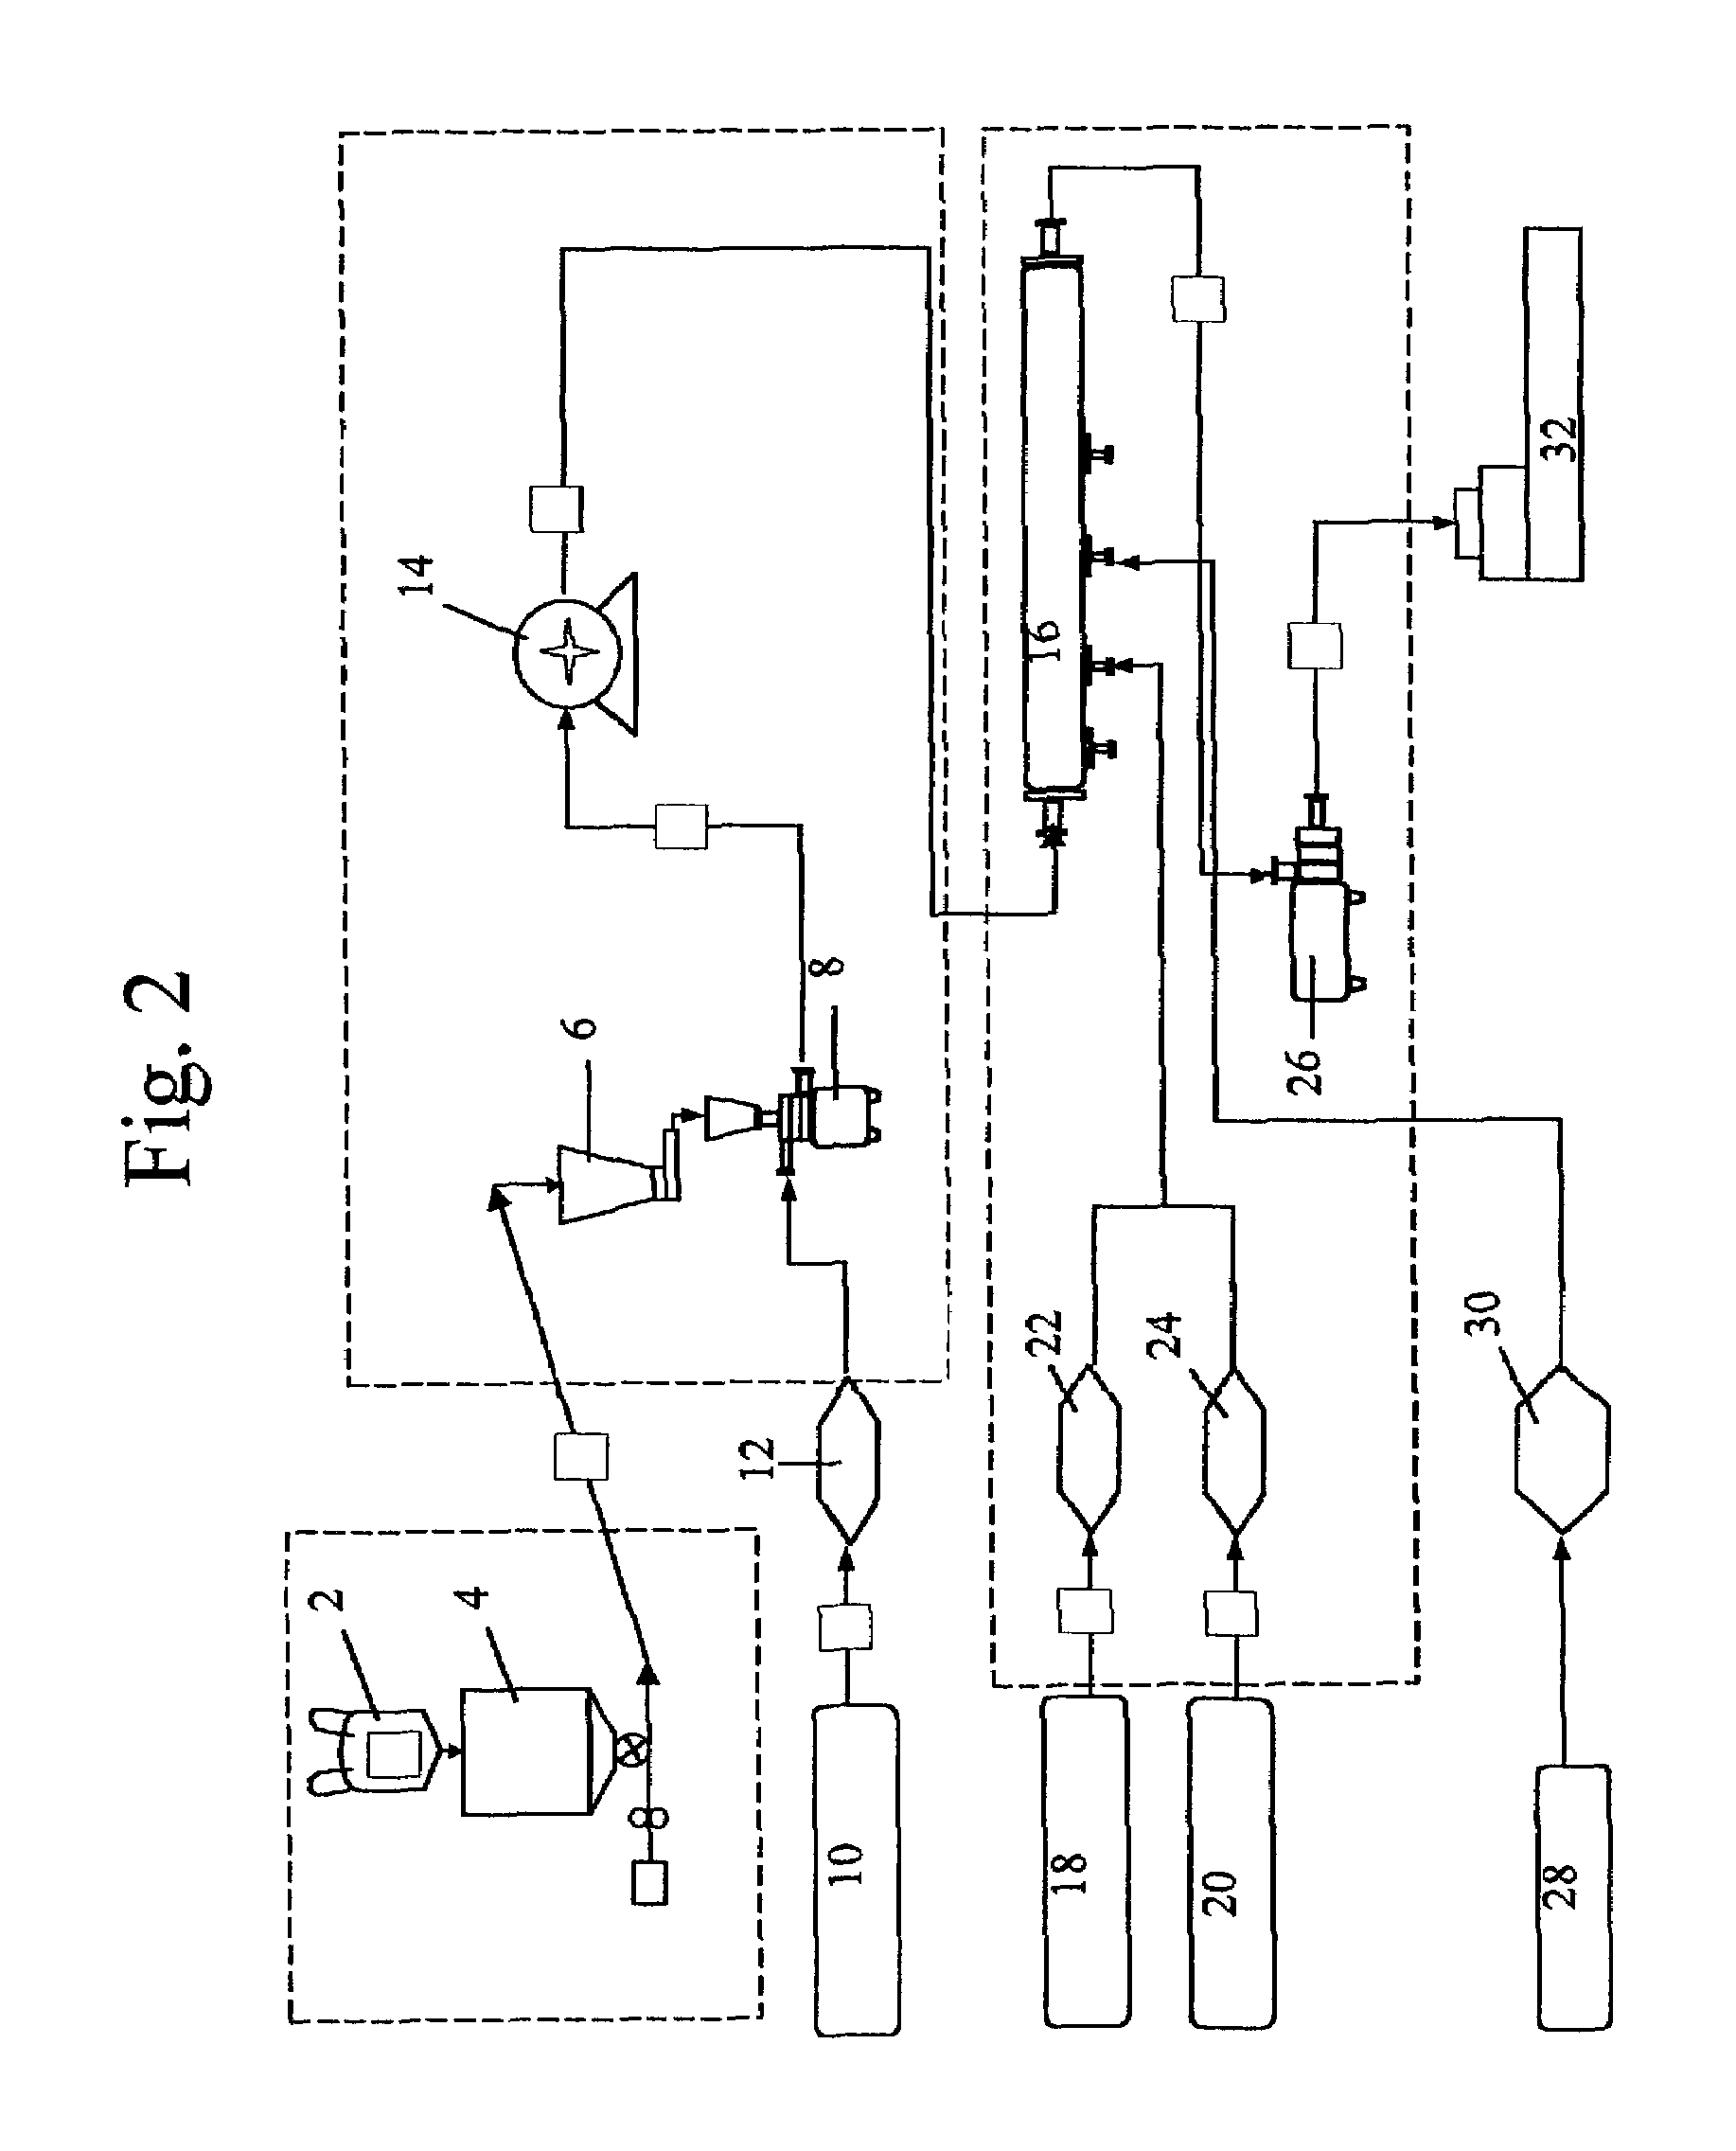 System and method for on-line mixing and application of surface coating compositions for food products